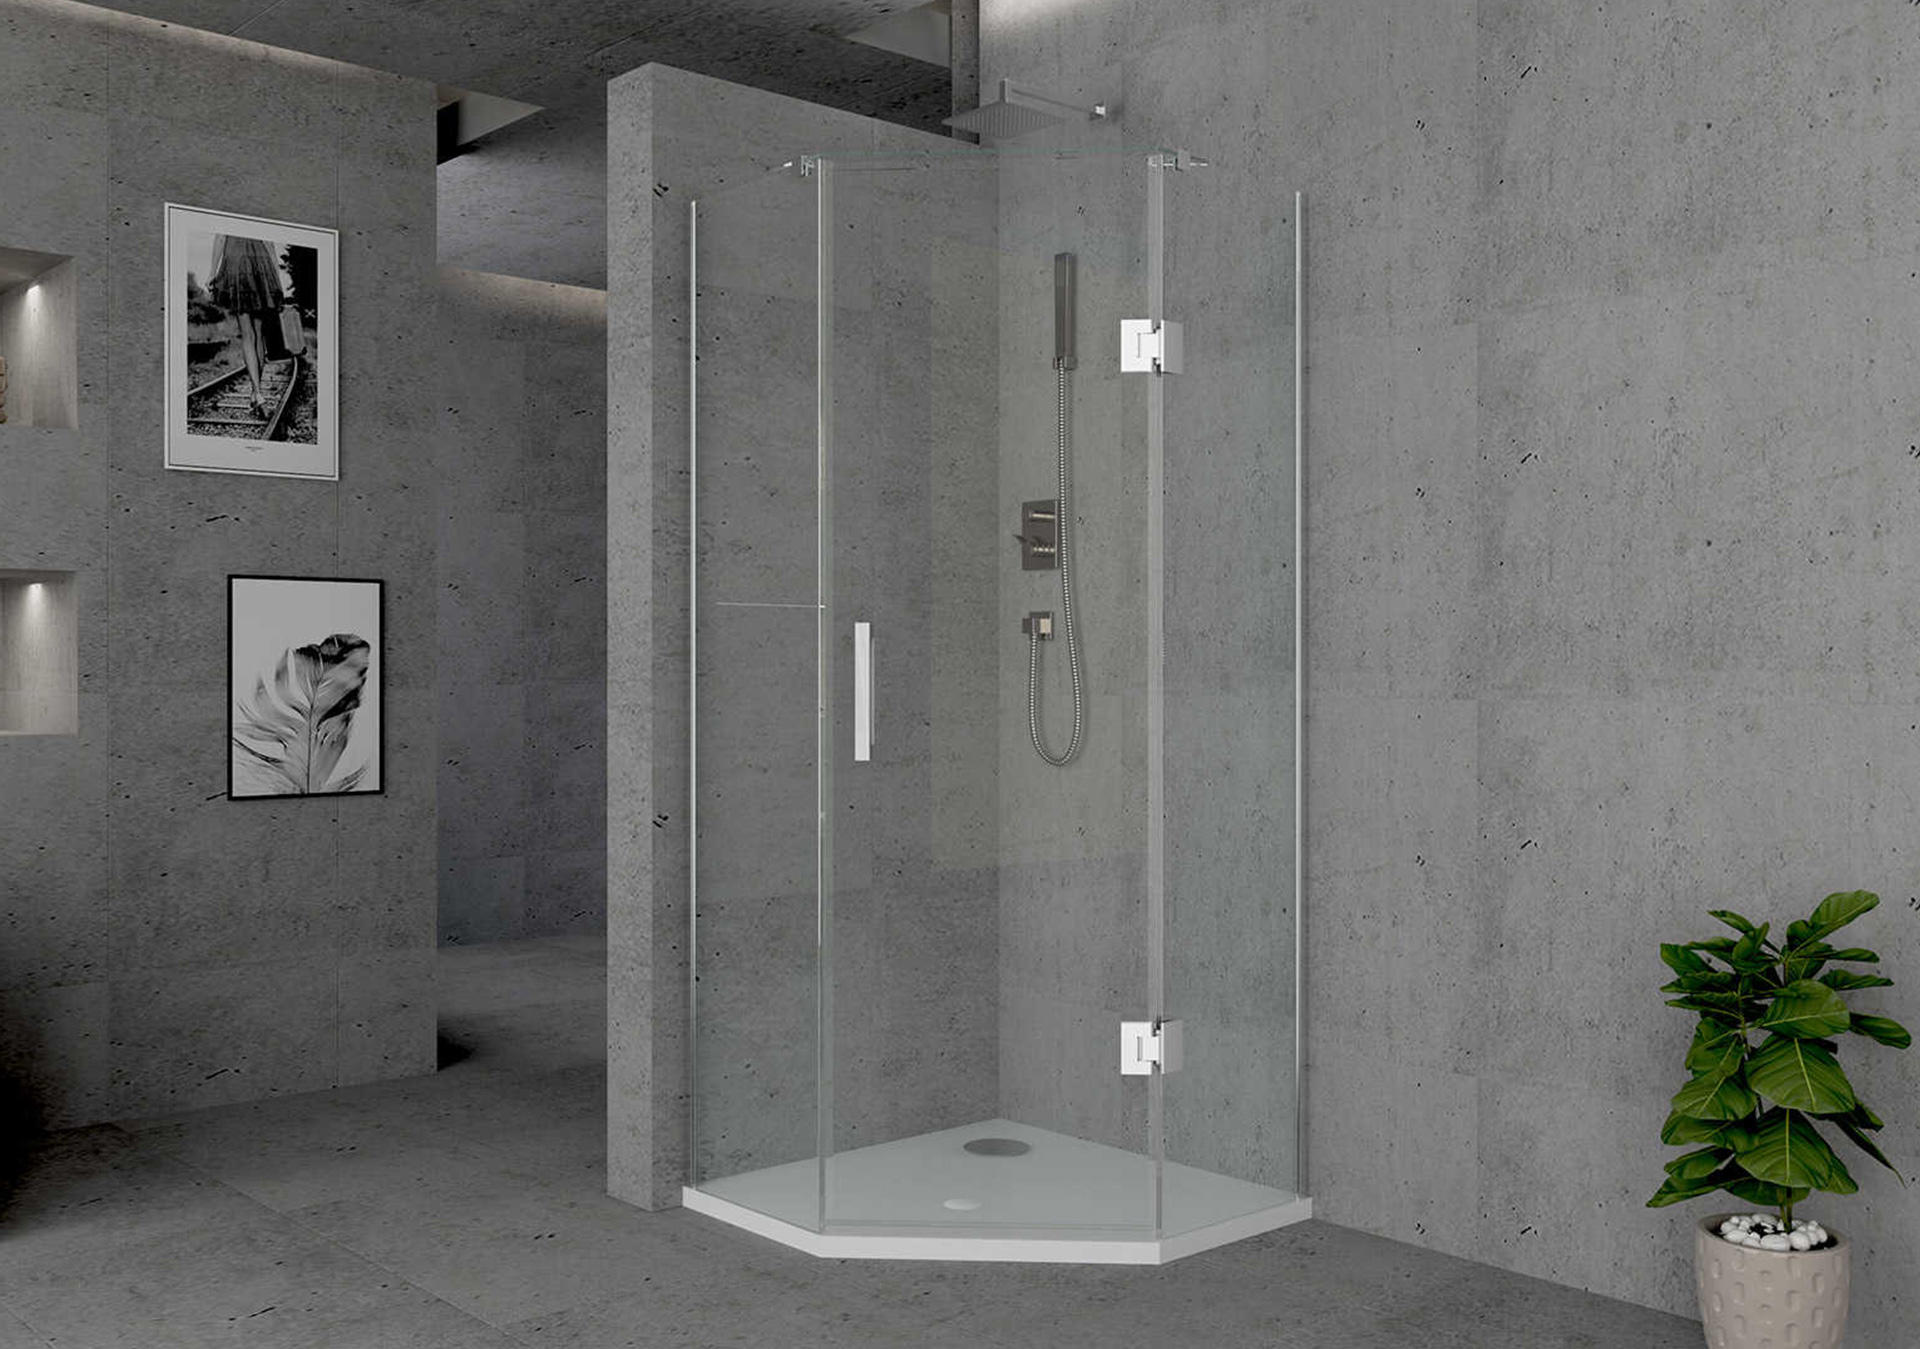 The industrial shower enclosure is an essential fixture 